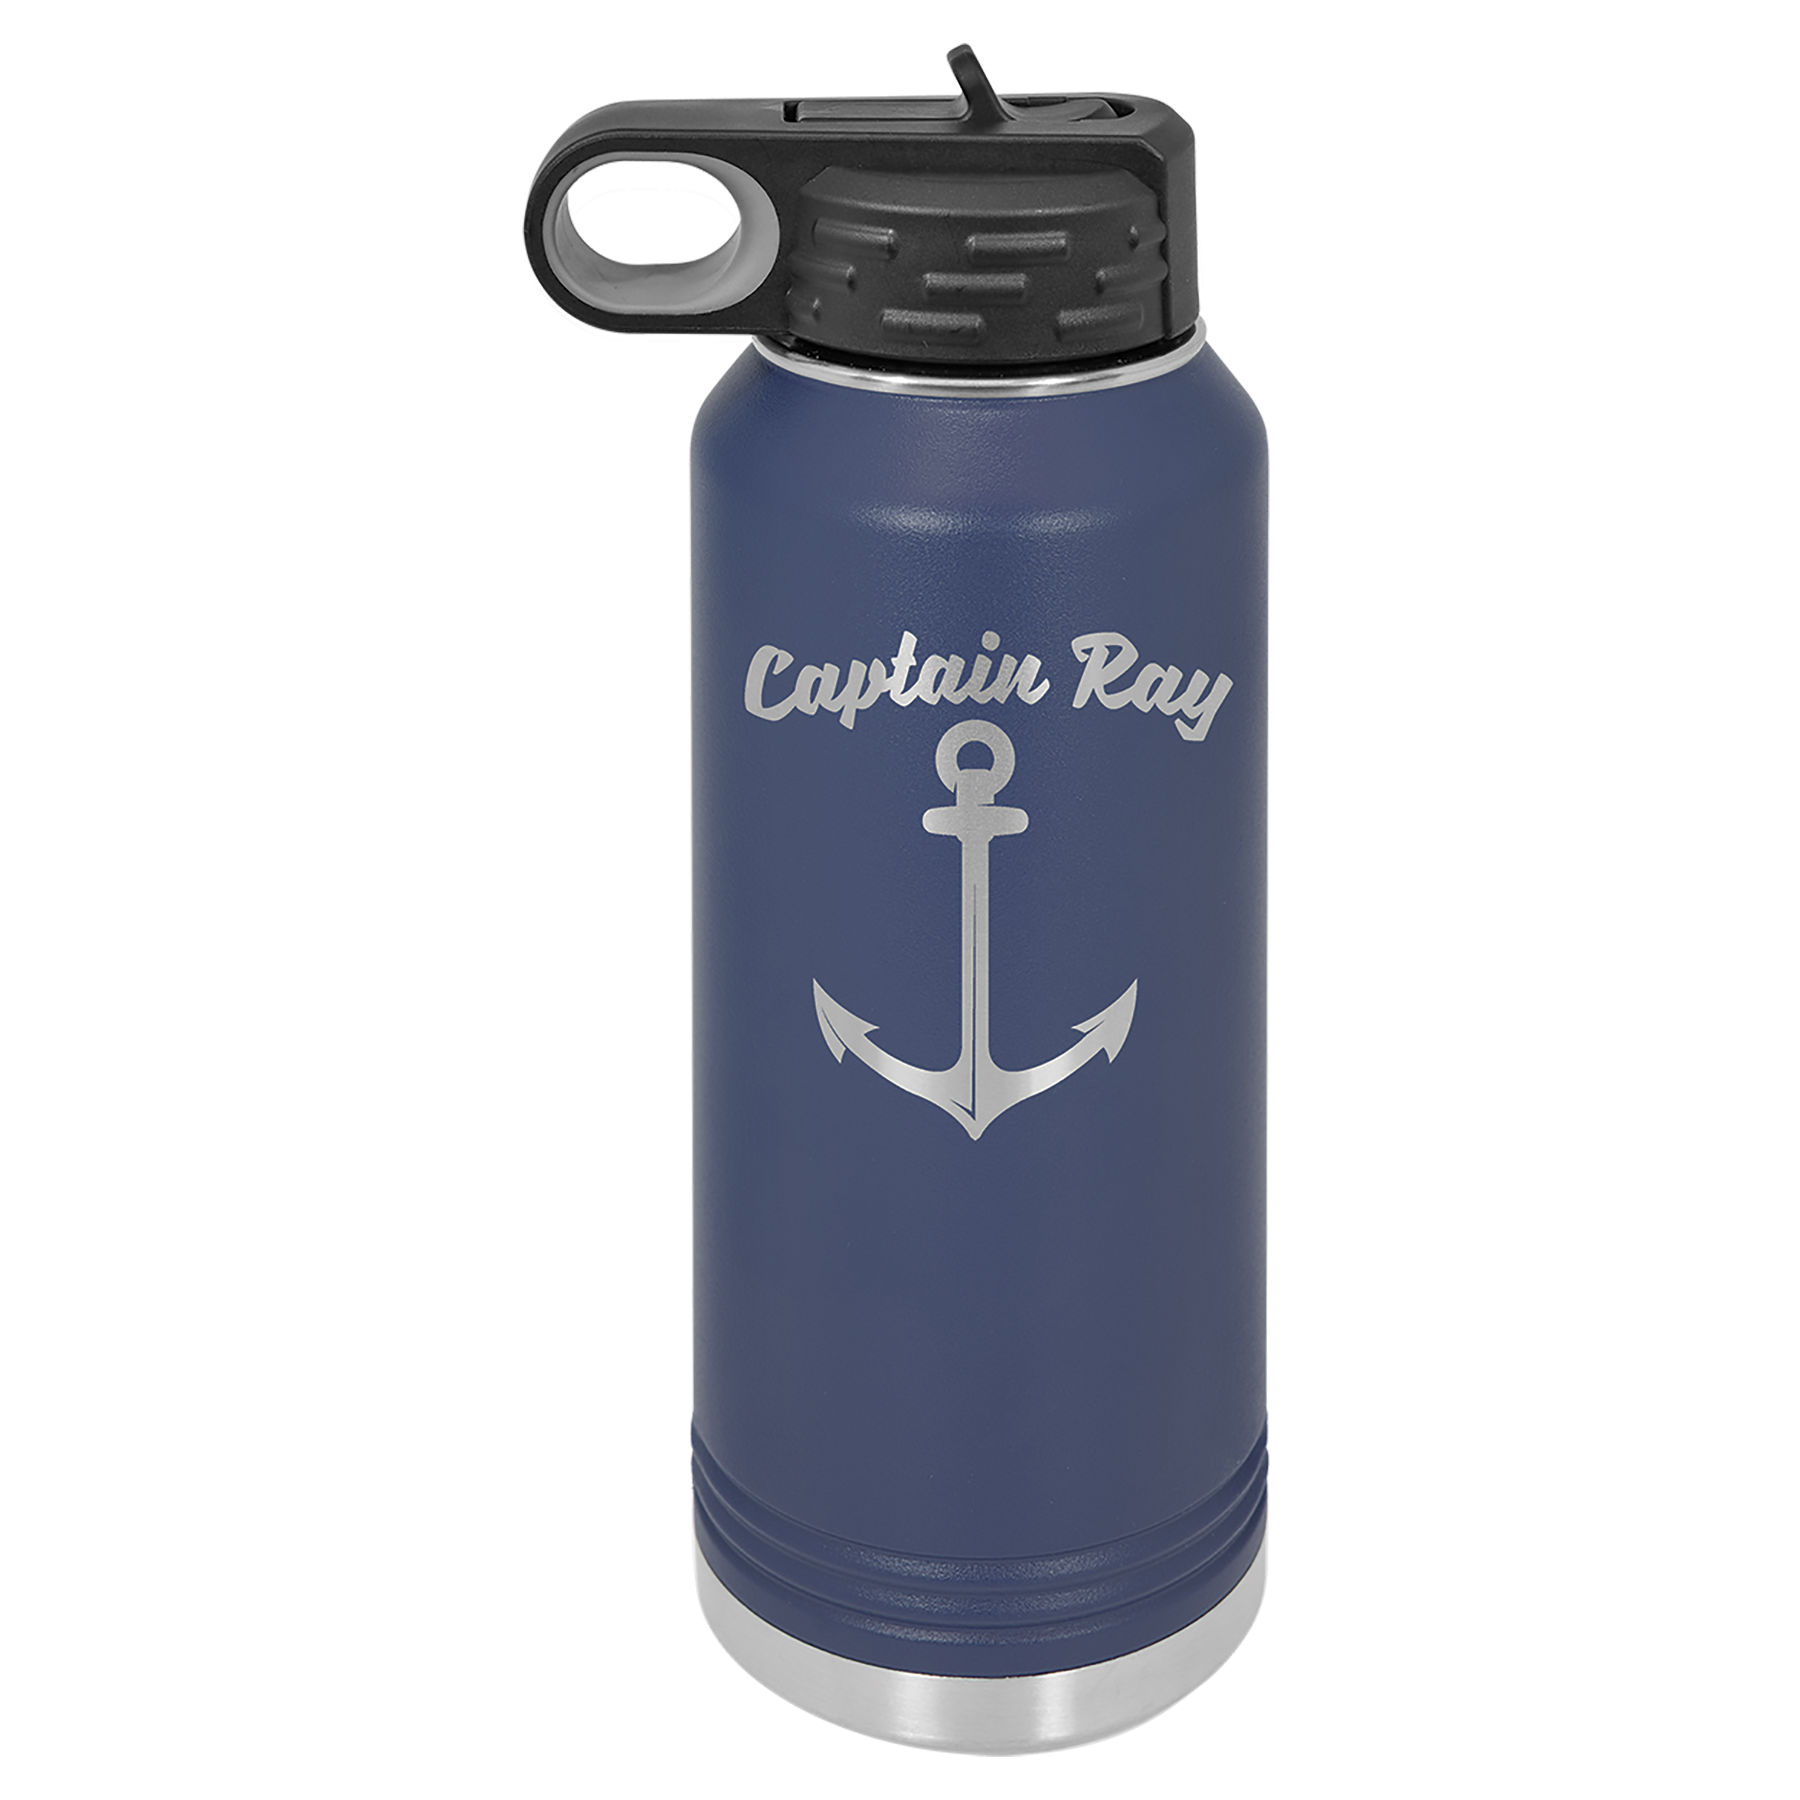 32 oz. Navy Blue Stainless Steel Insulated Water Bottler.  Customizable with your personal image or saying.